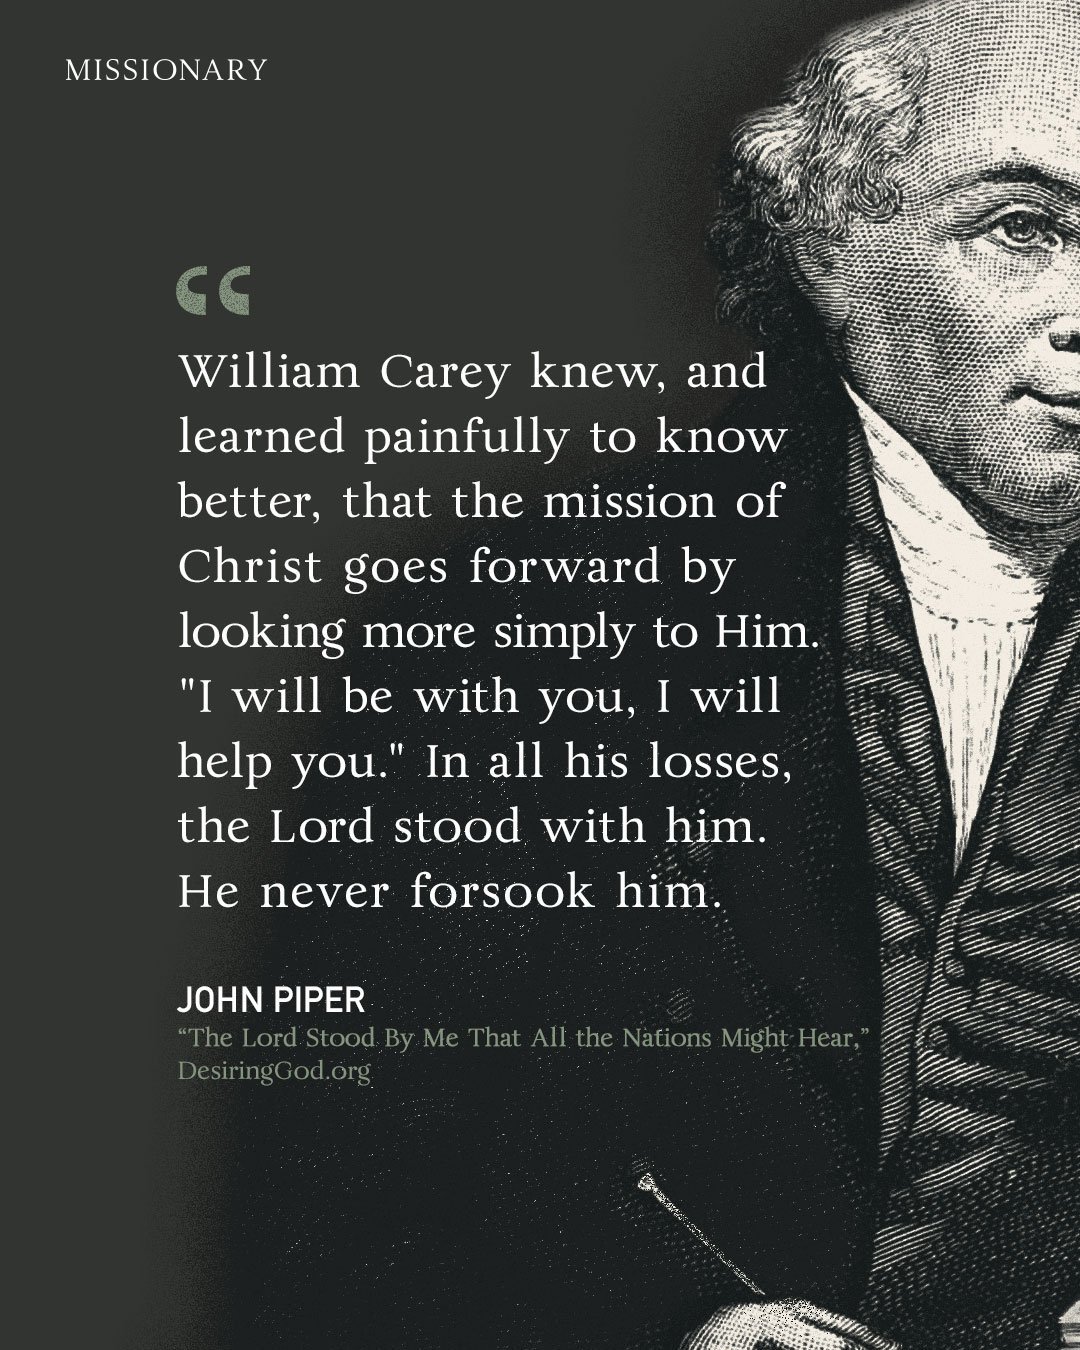 William Carey&rsquo;s epitaph: &ldquo;A wretched poor and helpless worm, on Thy kind arms I fall.&rdquo;

&ldquo;I want to be &lsquo;such a worm&rsquo;&mdash;a William-Carey-type worm. That is, an indomitable servant of Jesus, who, in spite of innume